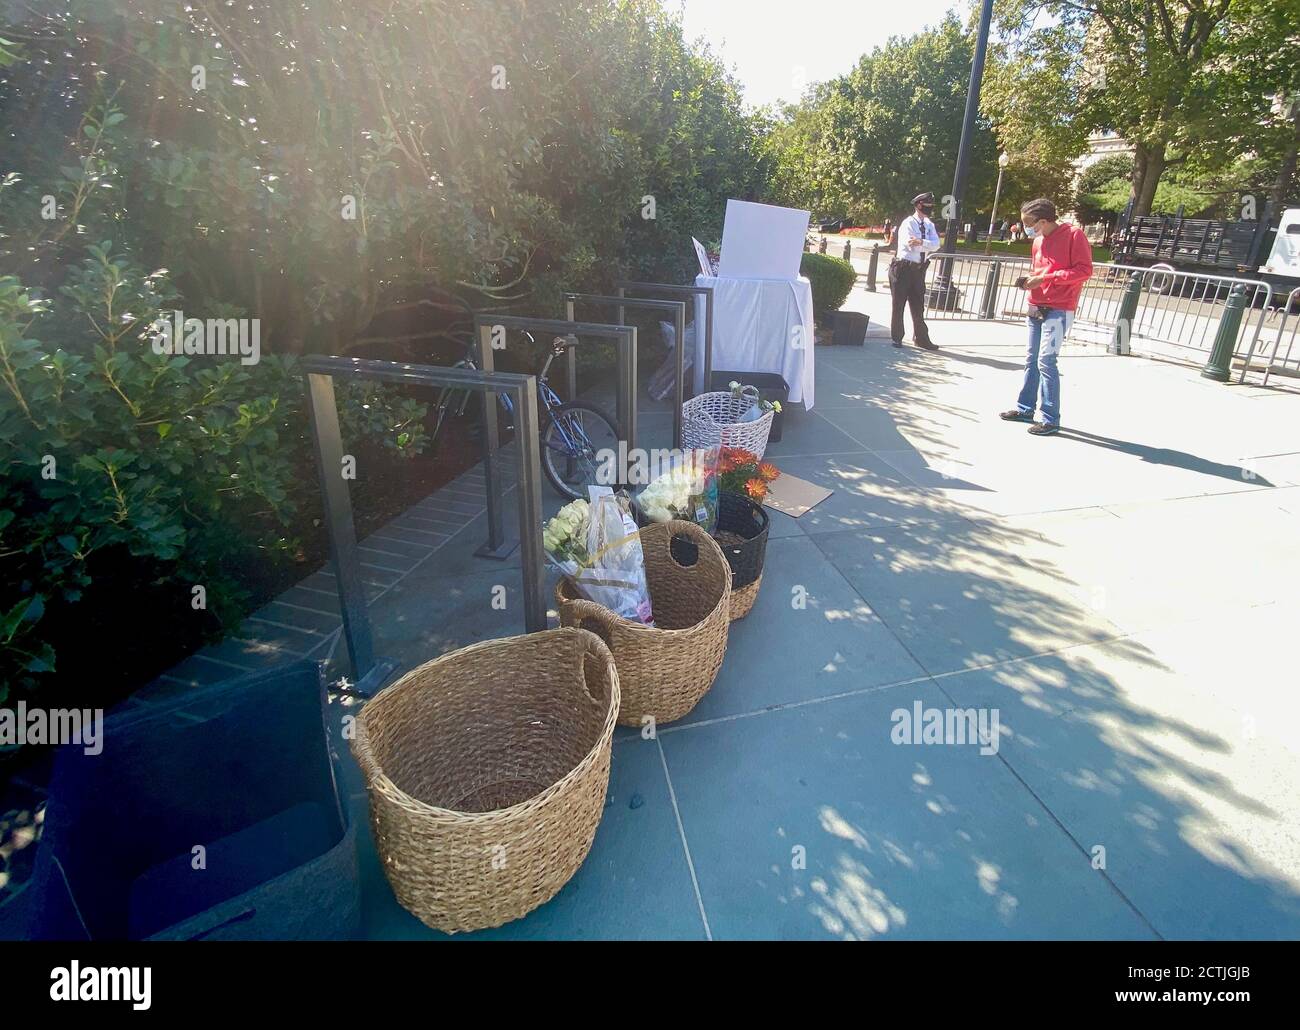 Washington Dc, Washington DC, USA. 23rd Sep, 2020. People set the flowers down in baskets outside the Supreme Court where Ruth Bader Ginsberg's body lies in repose on the Supreme Court Steps, Wednesday, Sept 23 Credit: Amy Katz/ZUMA Wire/Alamy Live News Stock Photo